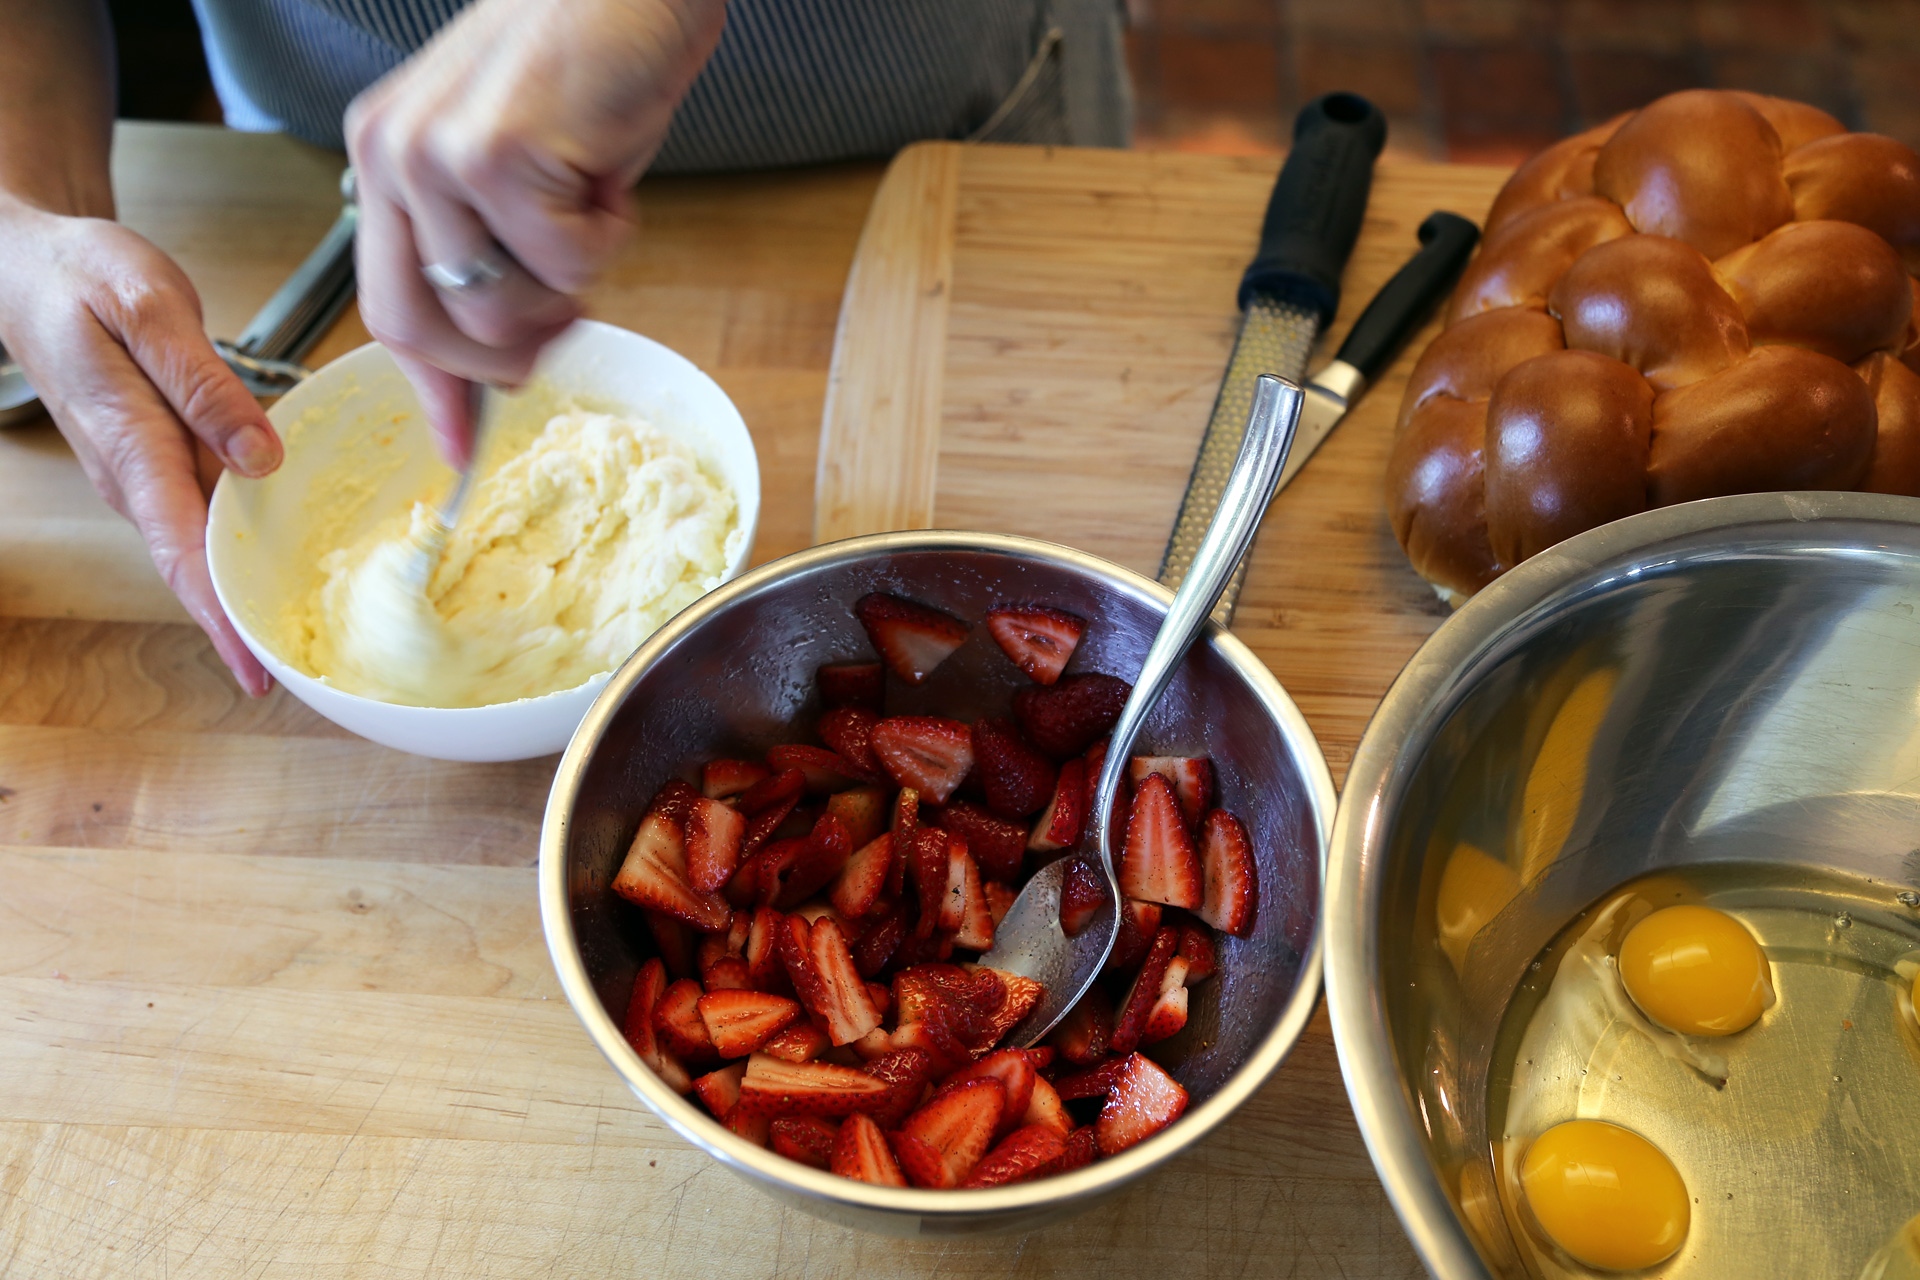 In a bowl, whisk together the ricotta, 2 to 3 tbsp sugar, and orange zest.